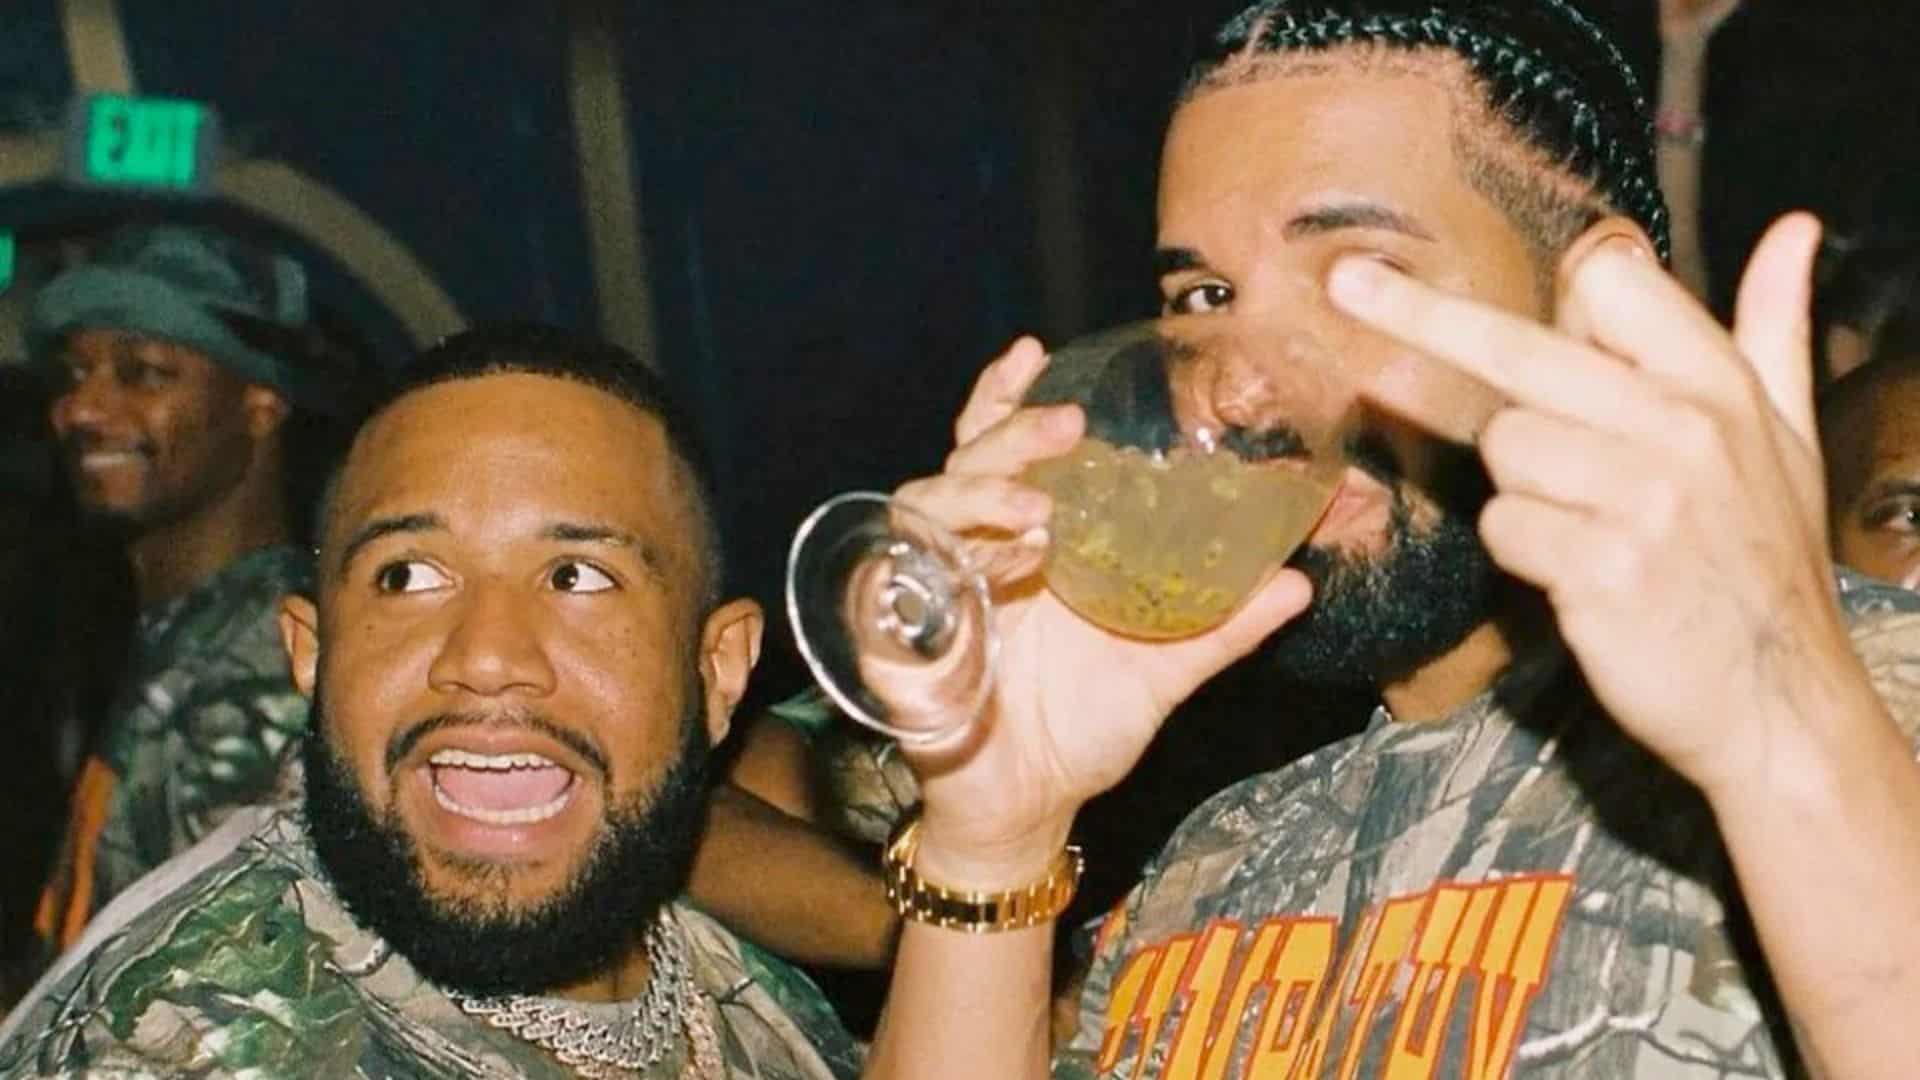 GORDO reunites with Drake to produce 2 tracks for his new album ‘For All the Dogs’